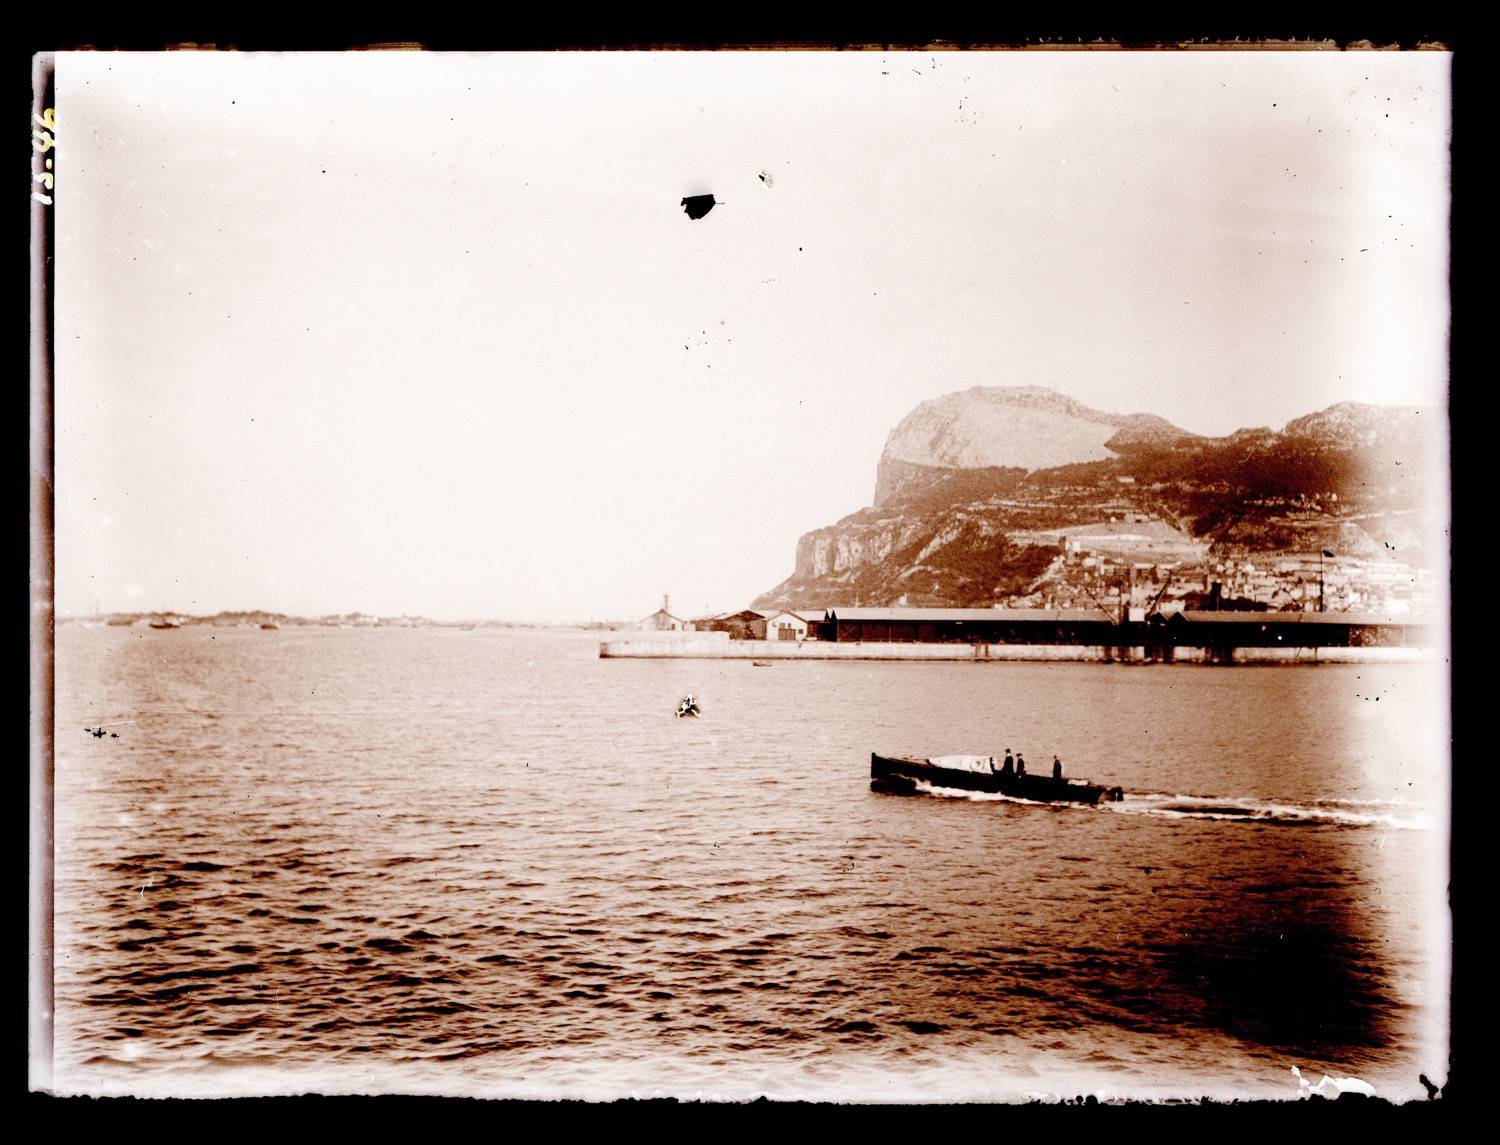 View of the Rock of Gibraltar and ships from the sea